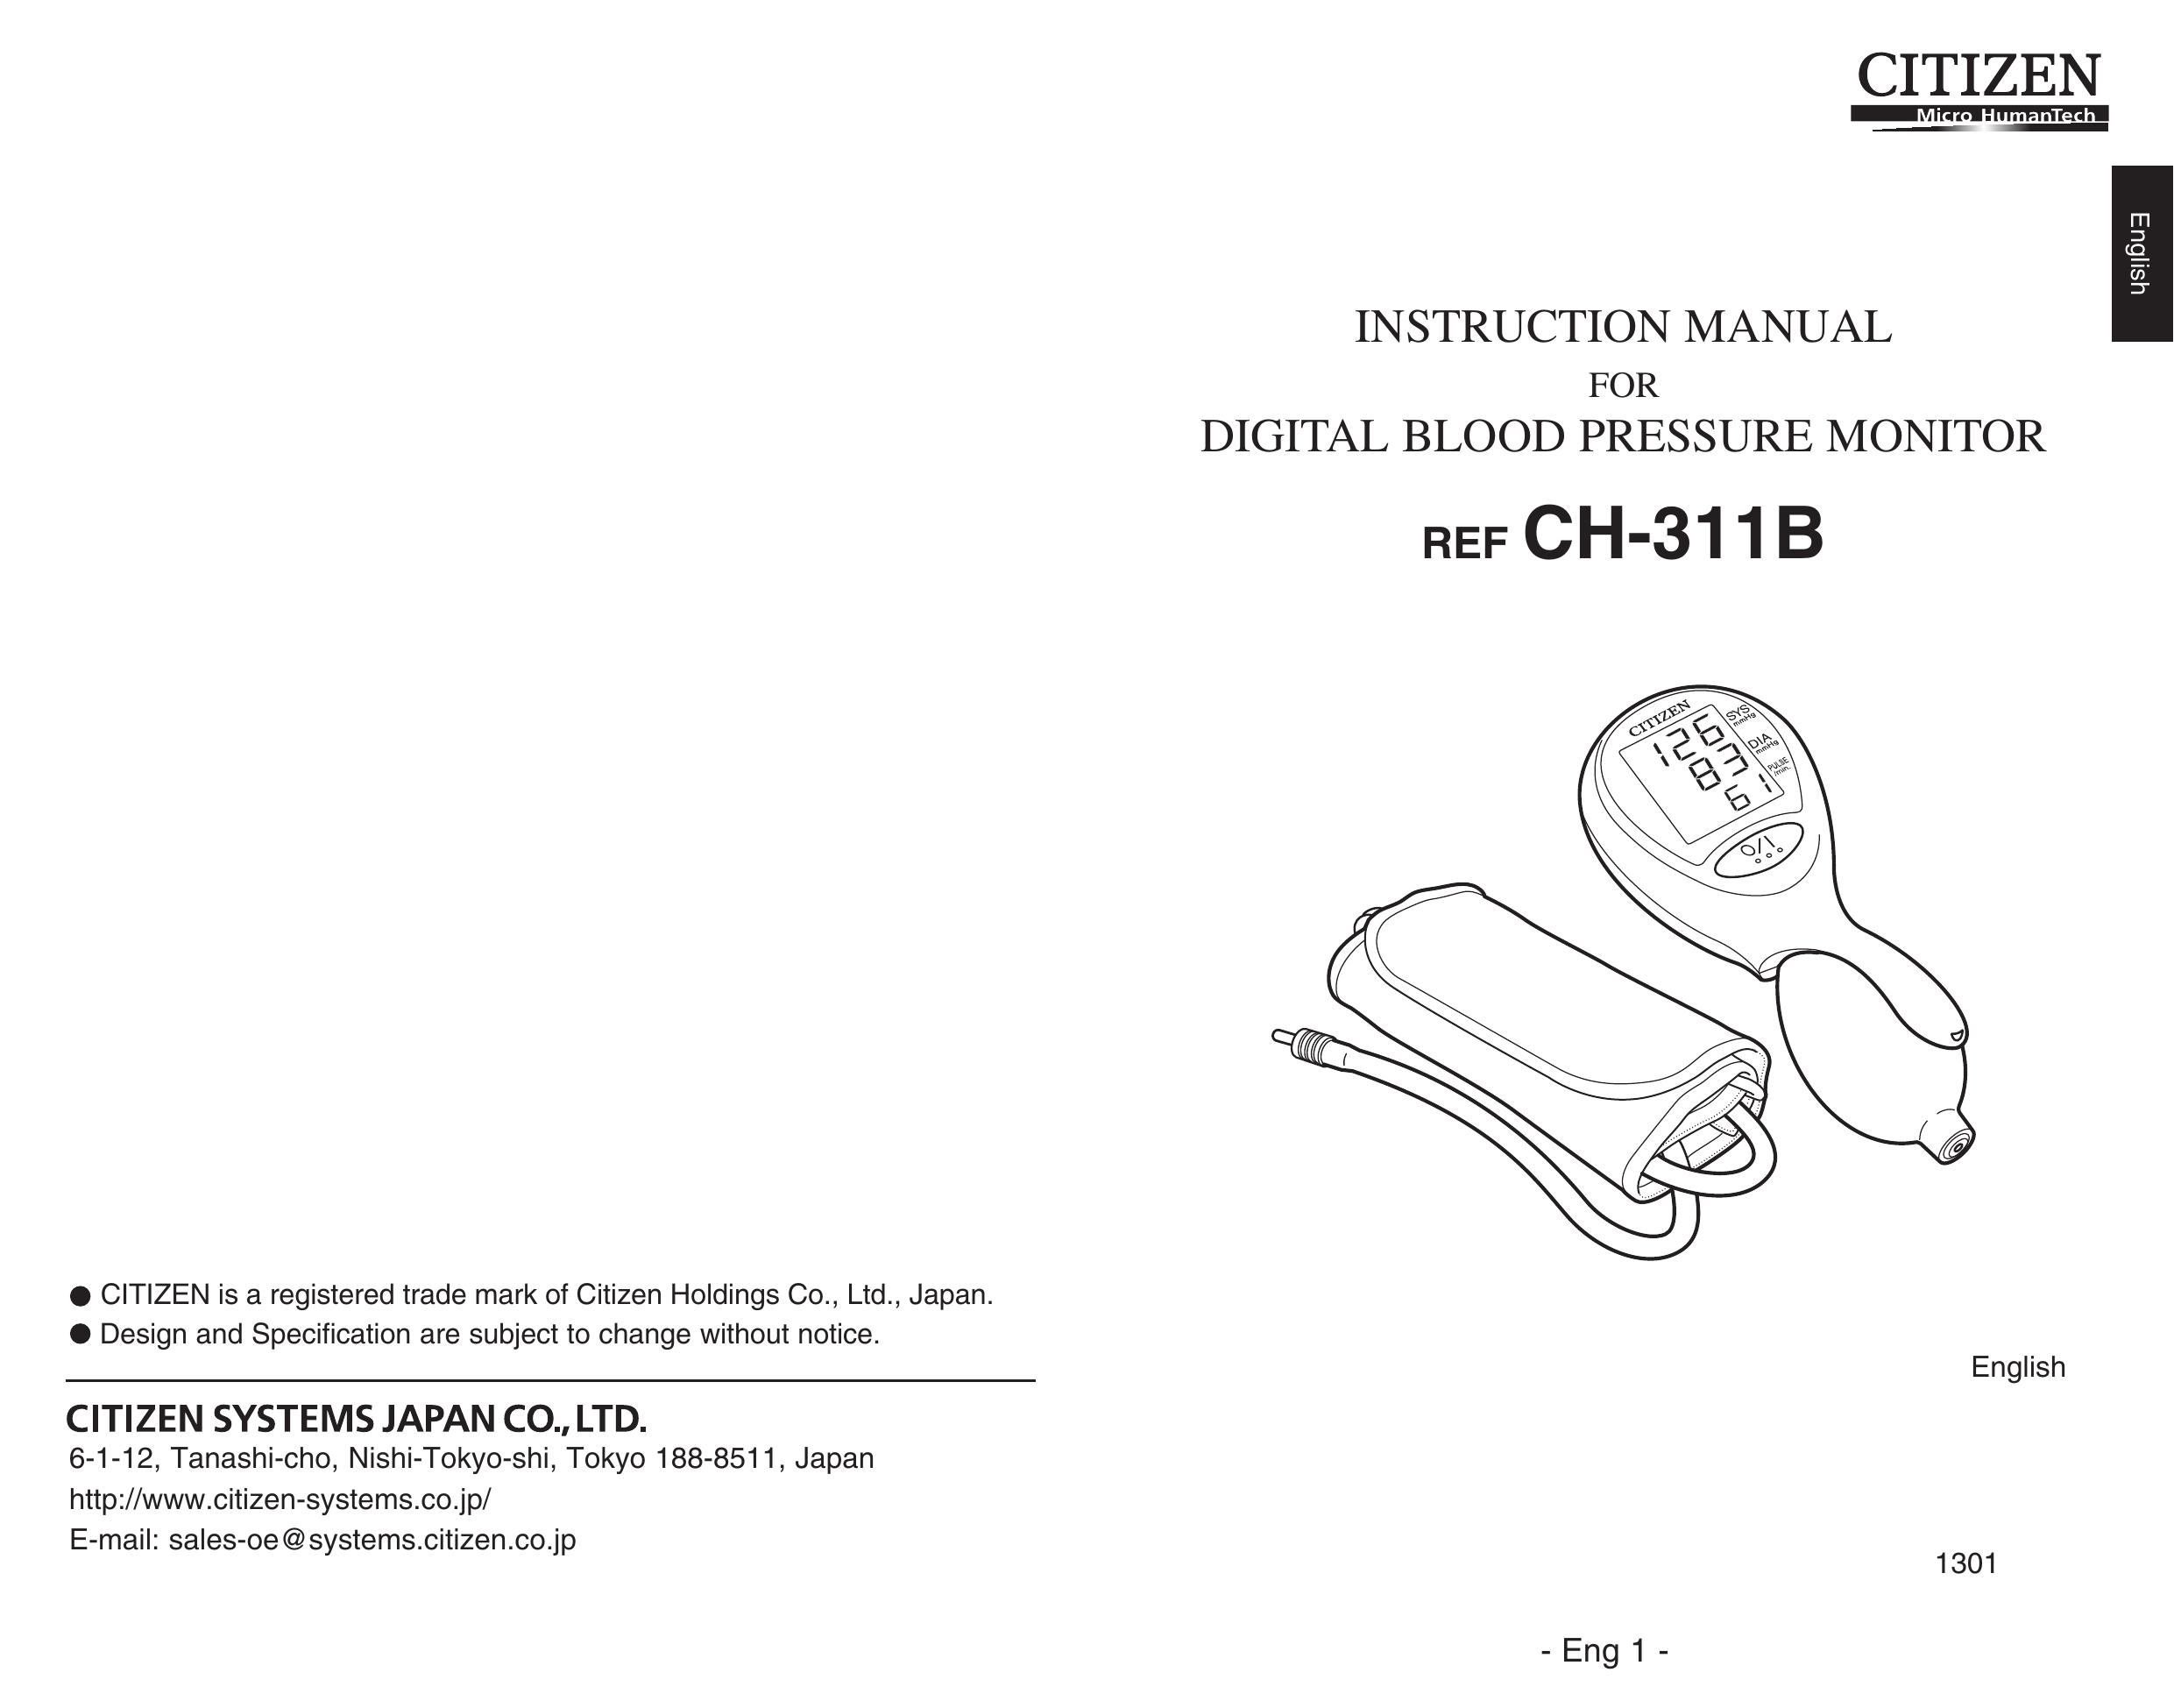 Citizen Systems REF CH-311B Blood Pressure Monitor User Manual